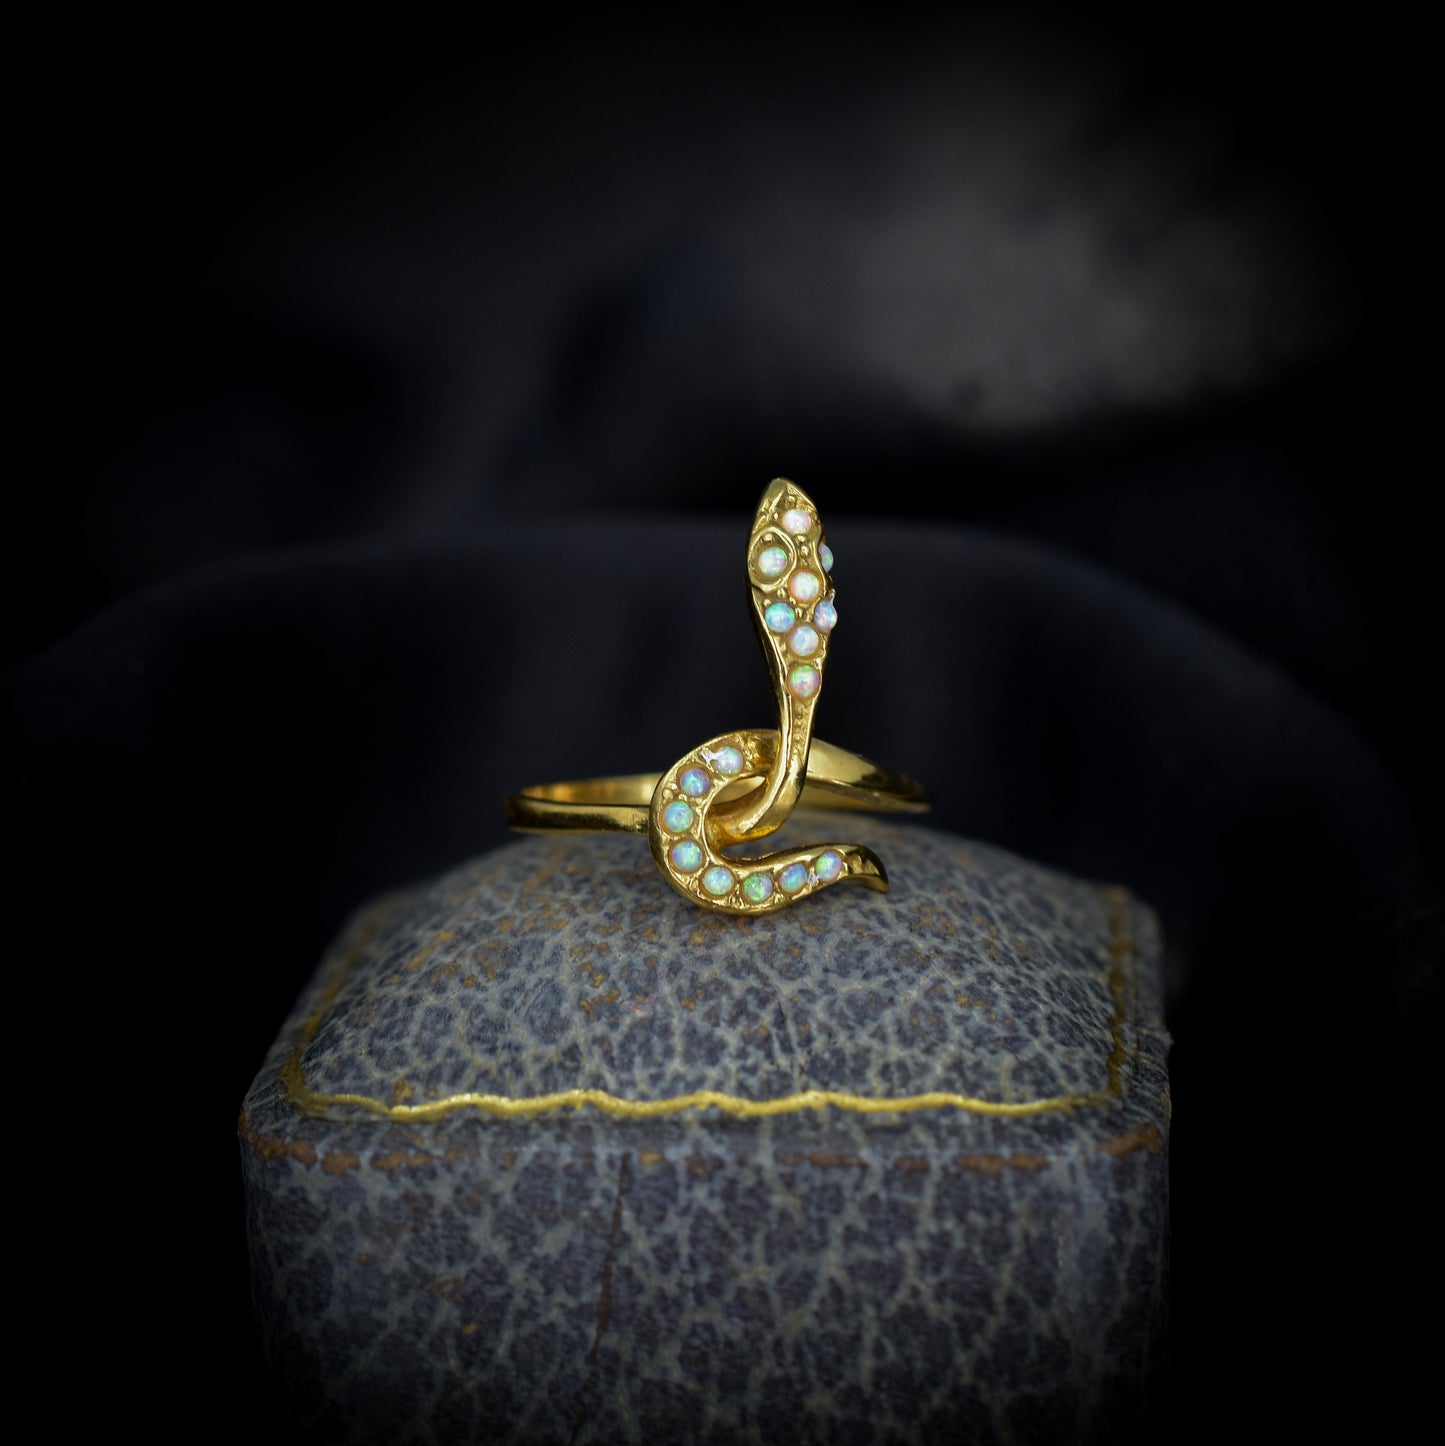 Opal Snake Serpent 18ct 18K Gold on Silver Ring | Antique Victorian Style